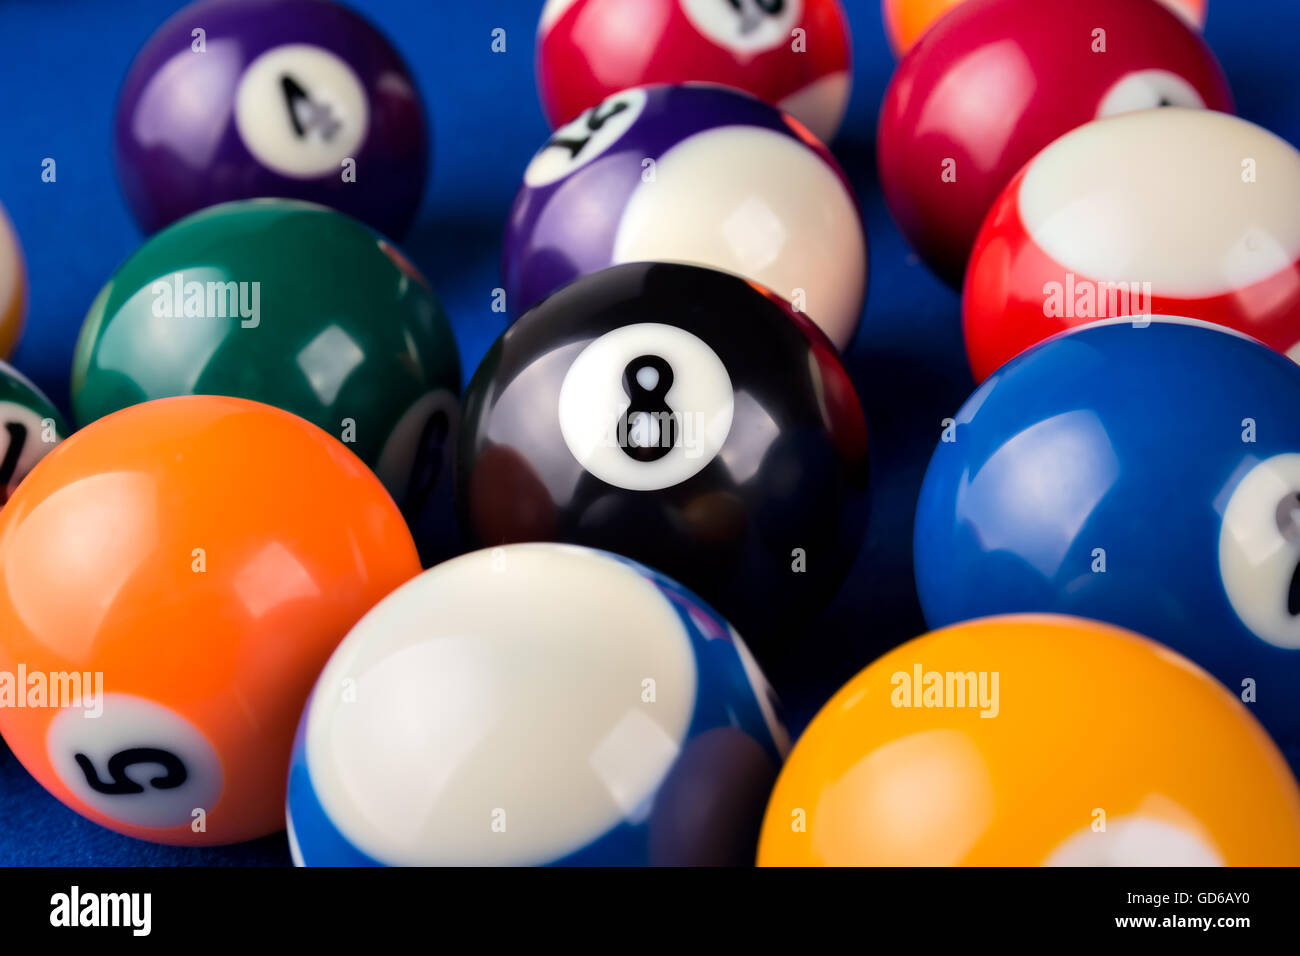 Different points of view billiard balls on a blue pool table. Stock Photo